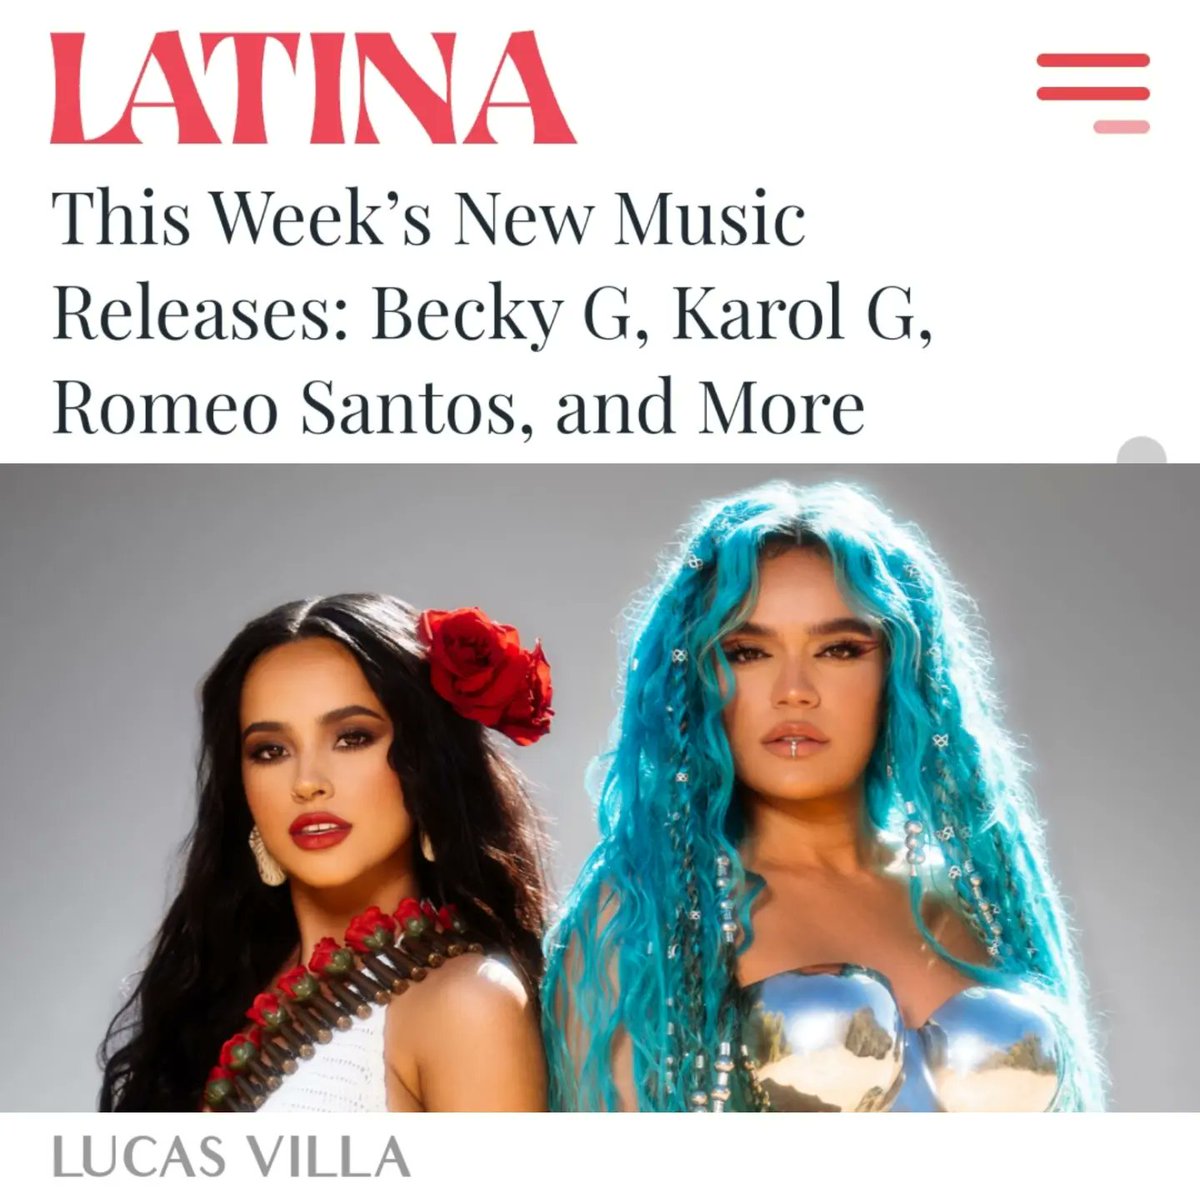 For my @latina debut I wrote about a few of my favorite new releases by @iambeckyg, @karolg, @rauwalejandro, @dannocean, @nattinatasha, @GOYOCQT, @MariaBecerra22 & more 🎧 latina.com/this-weeks-new…